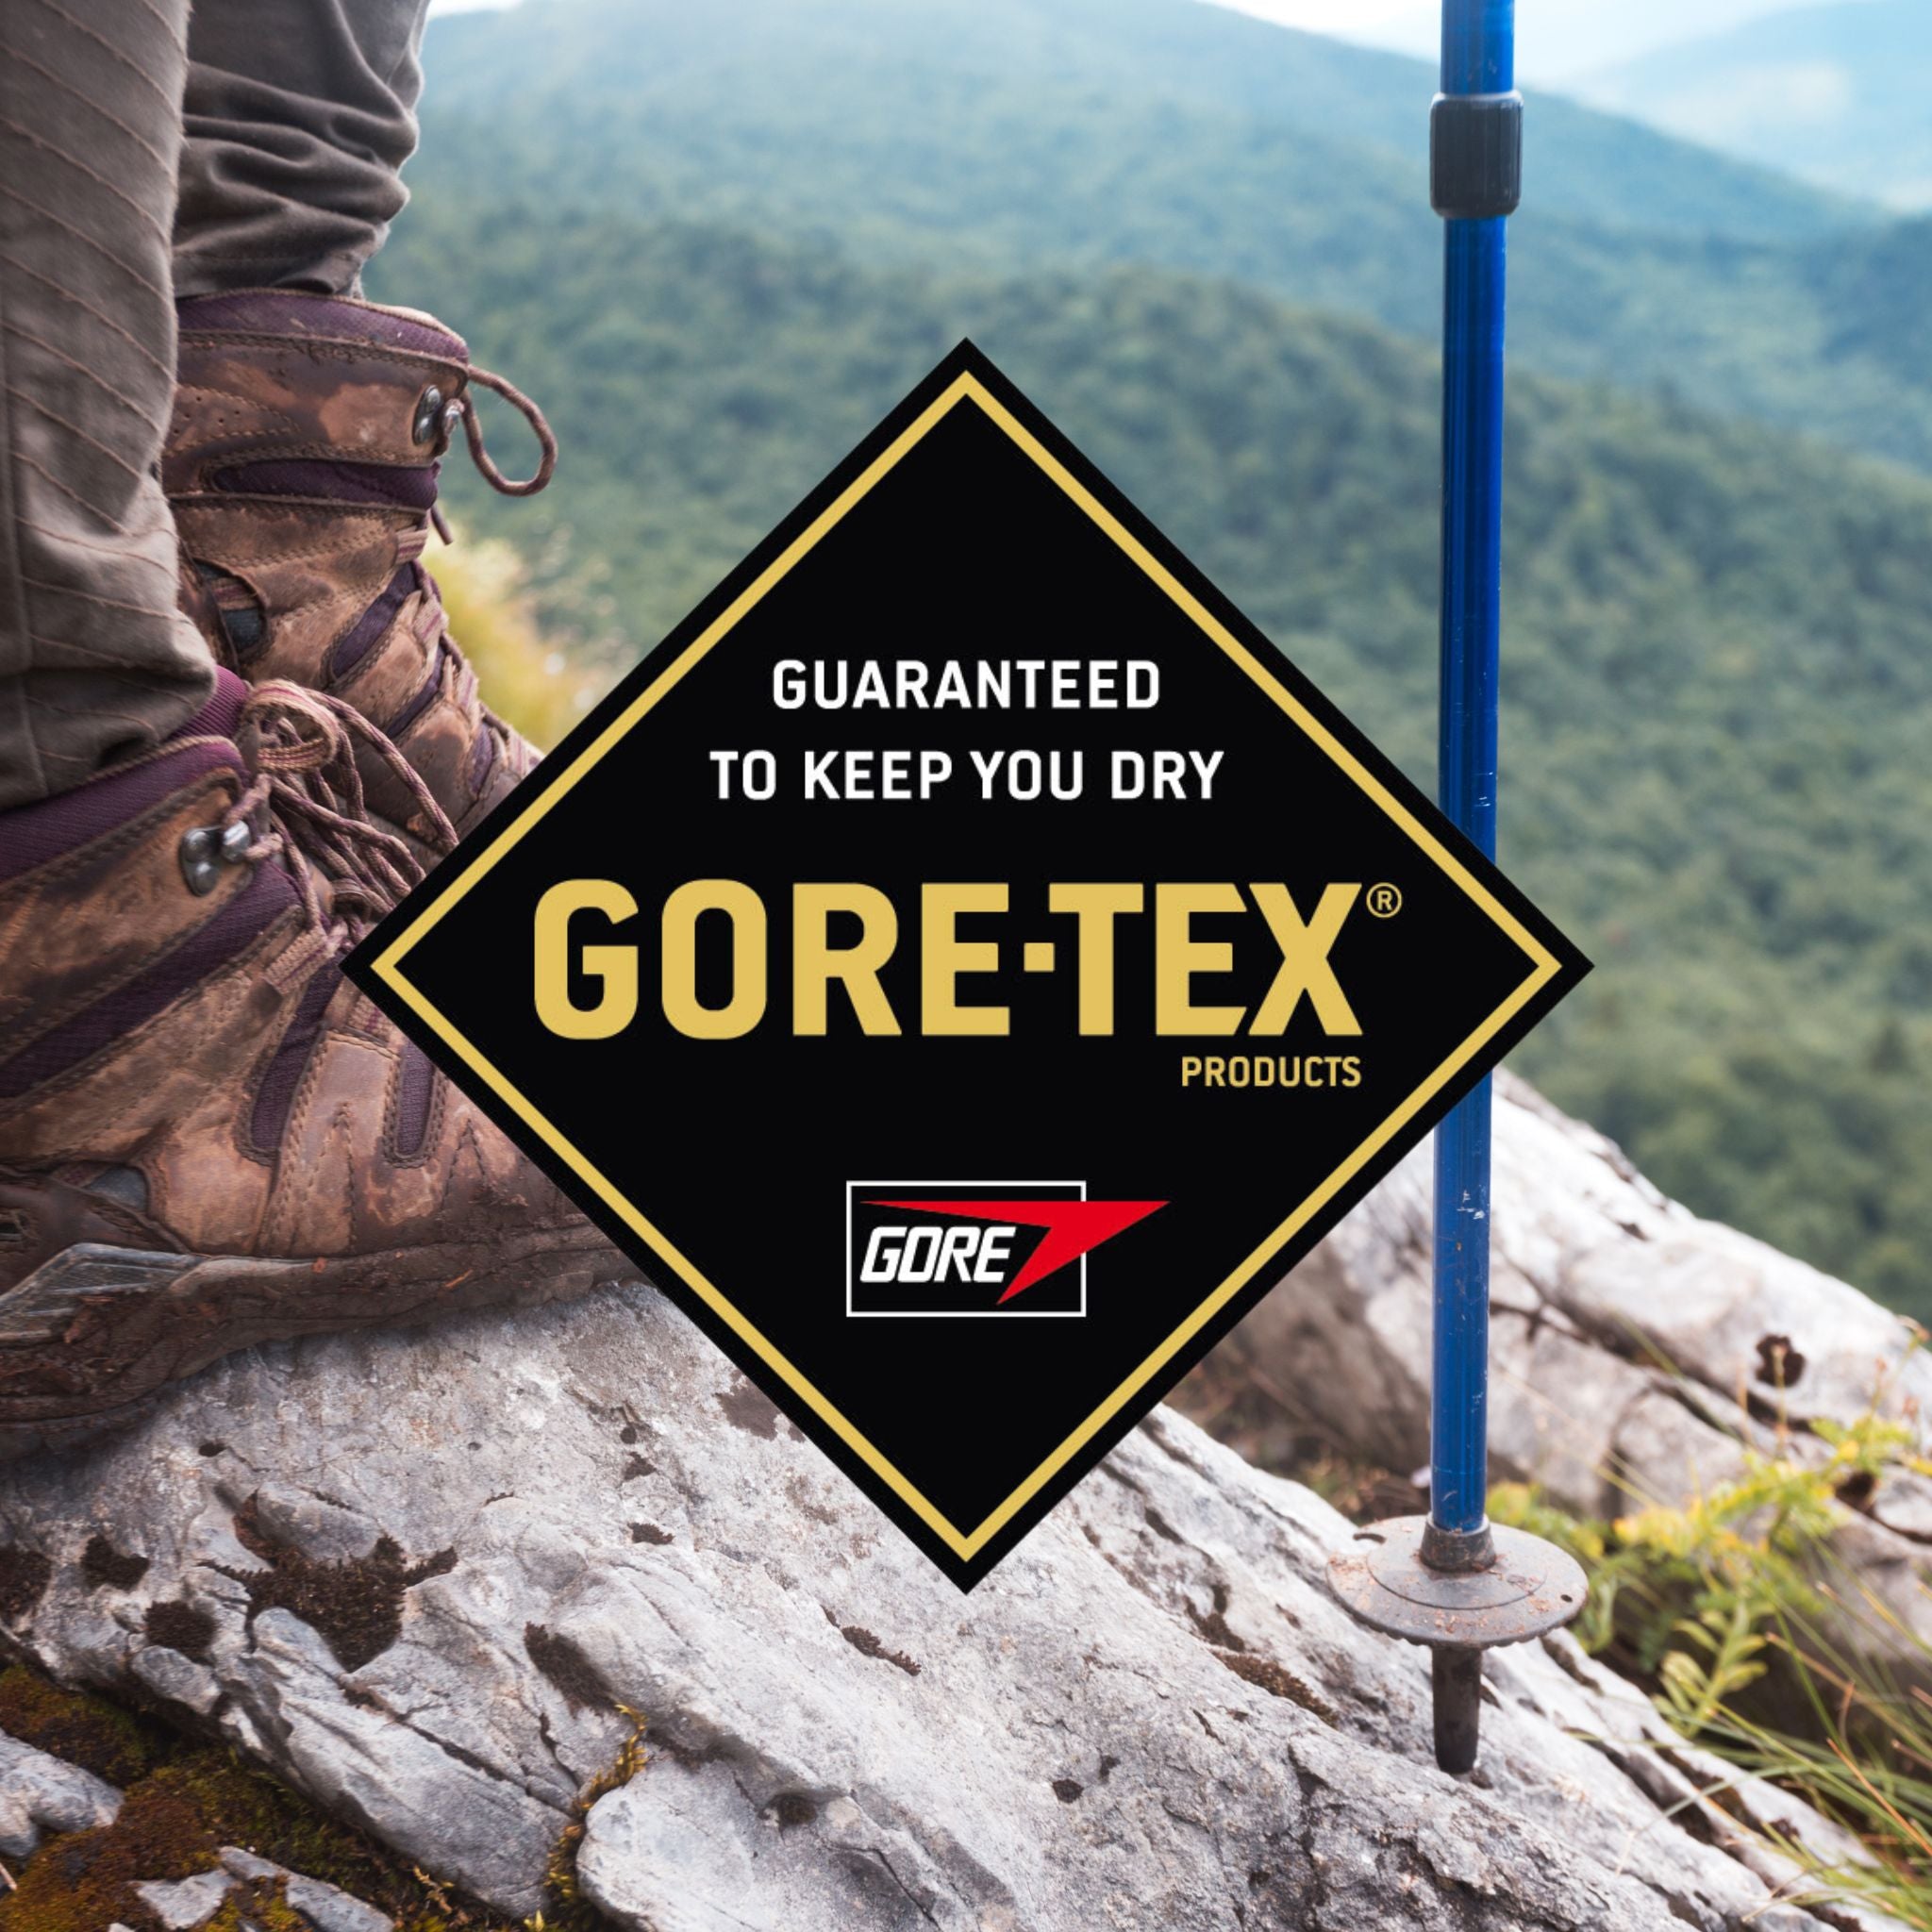 Gore-tex footwear at Portwest - The Outdoor Shop